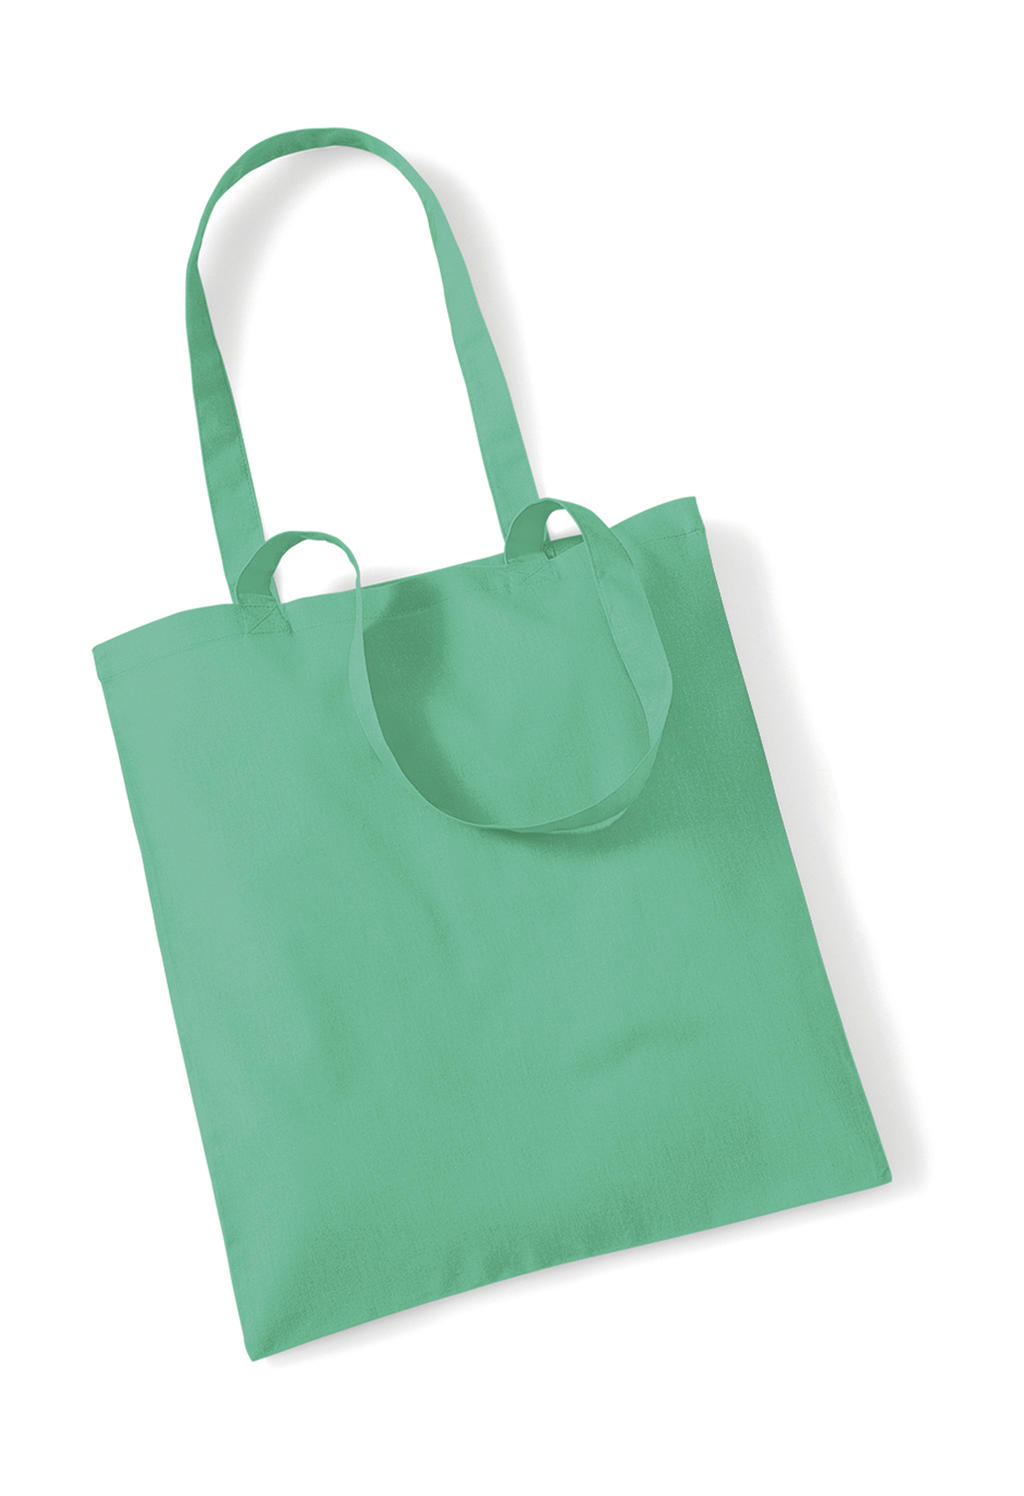  Bag for Life - Long Handles in Farbe Mint